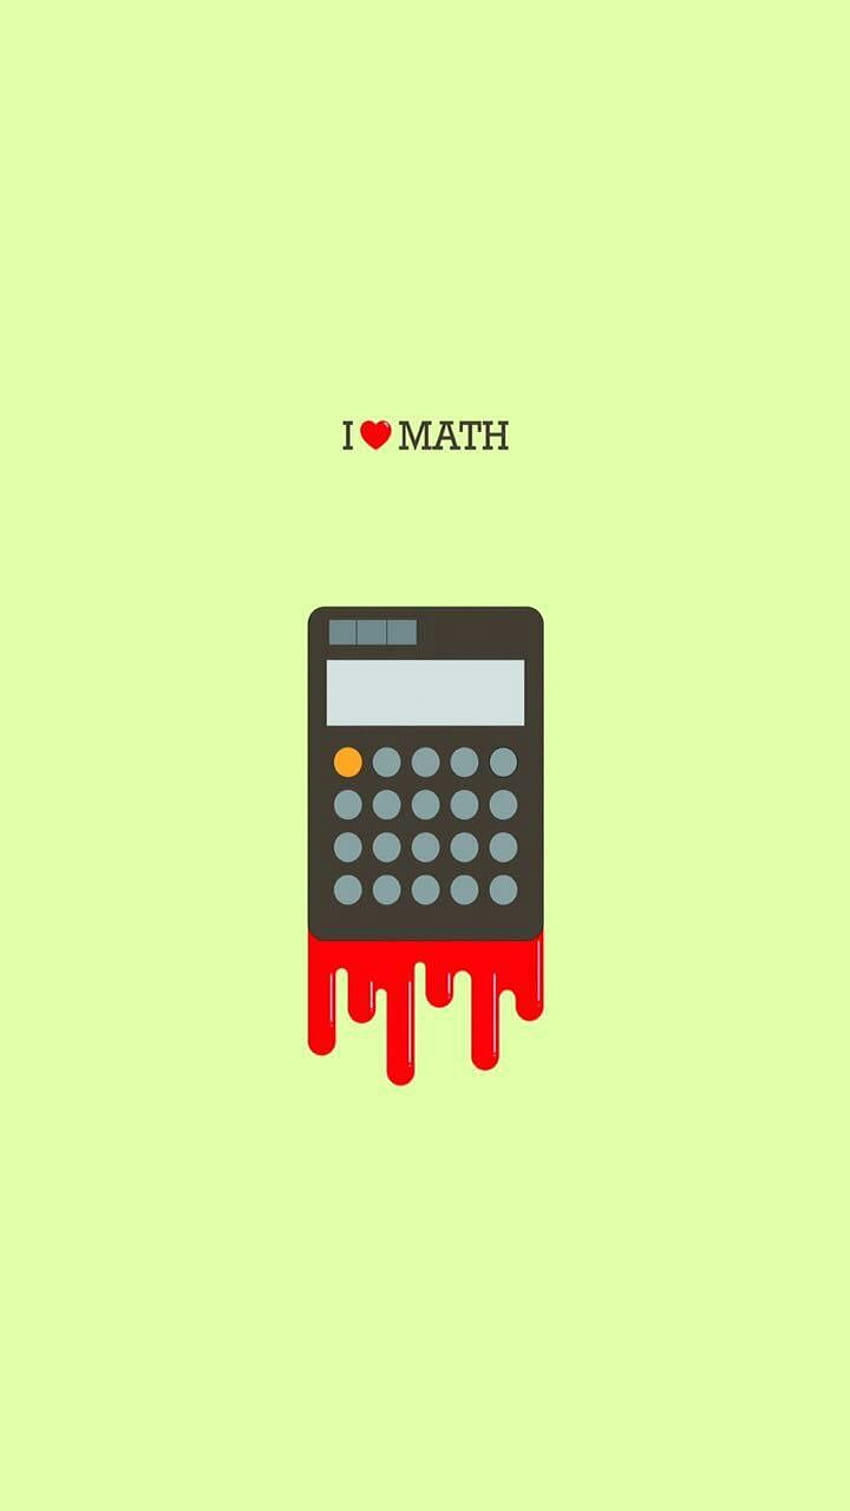 The image of a calculator with blood on it - Math